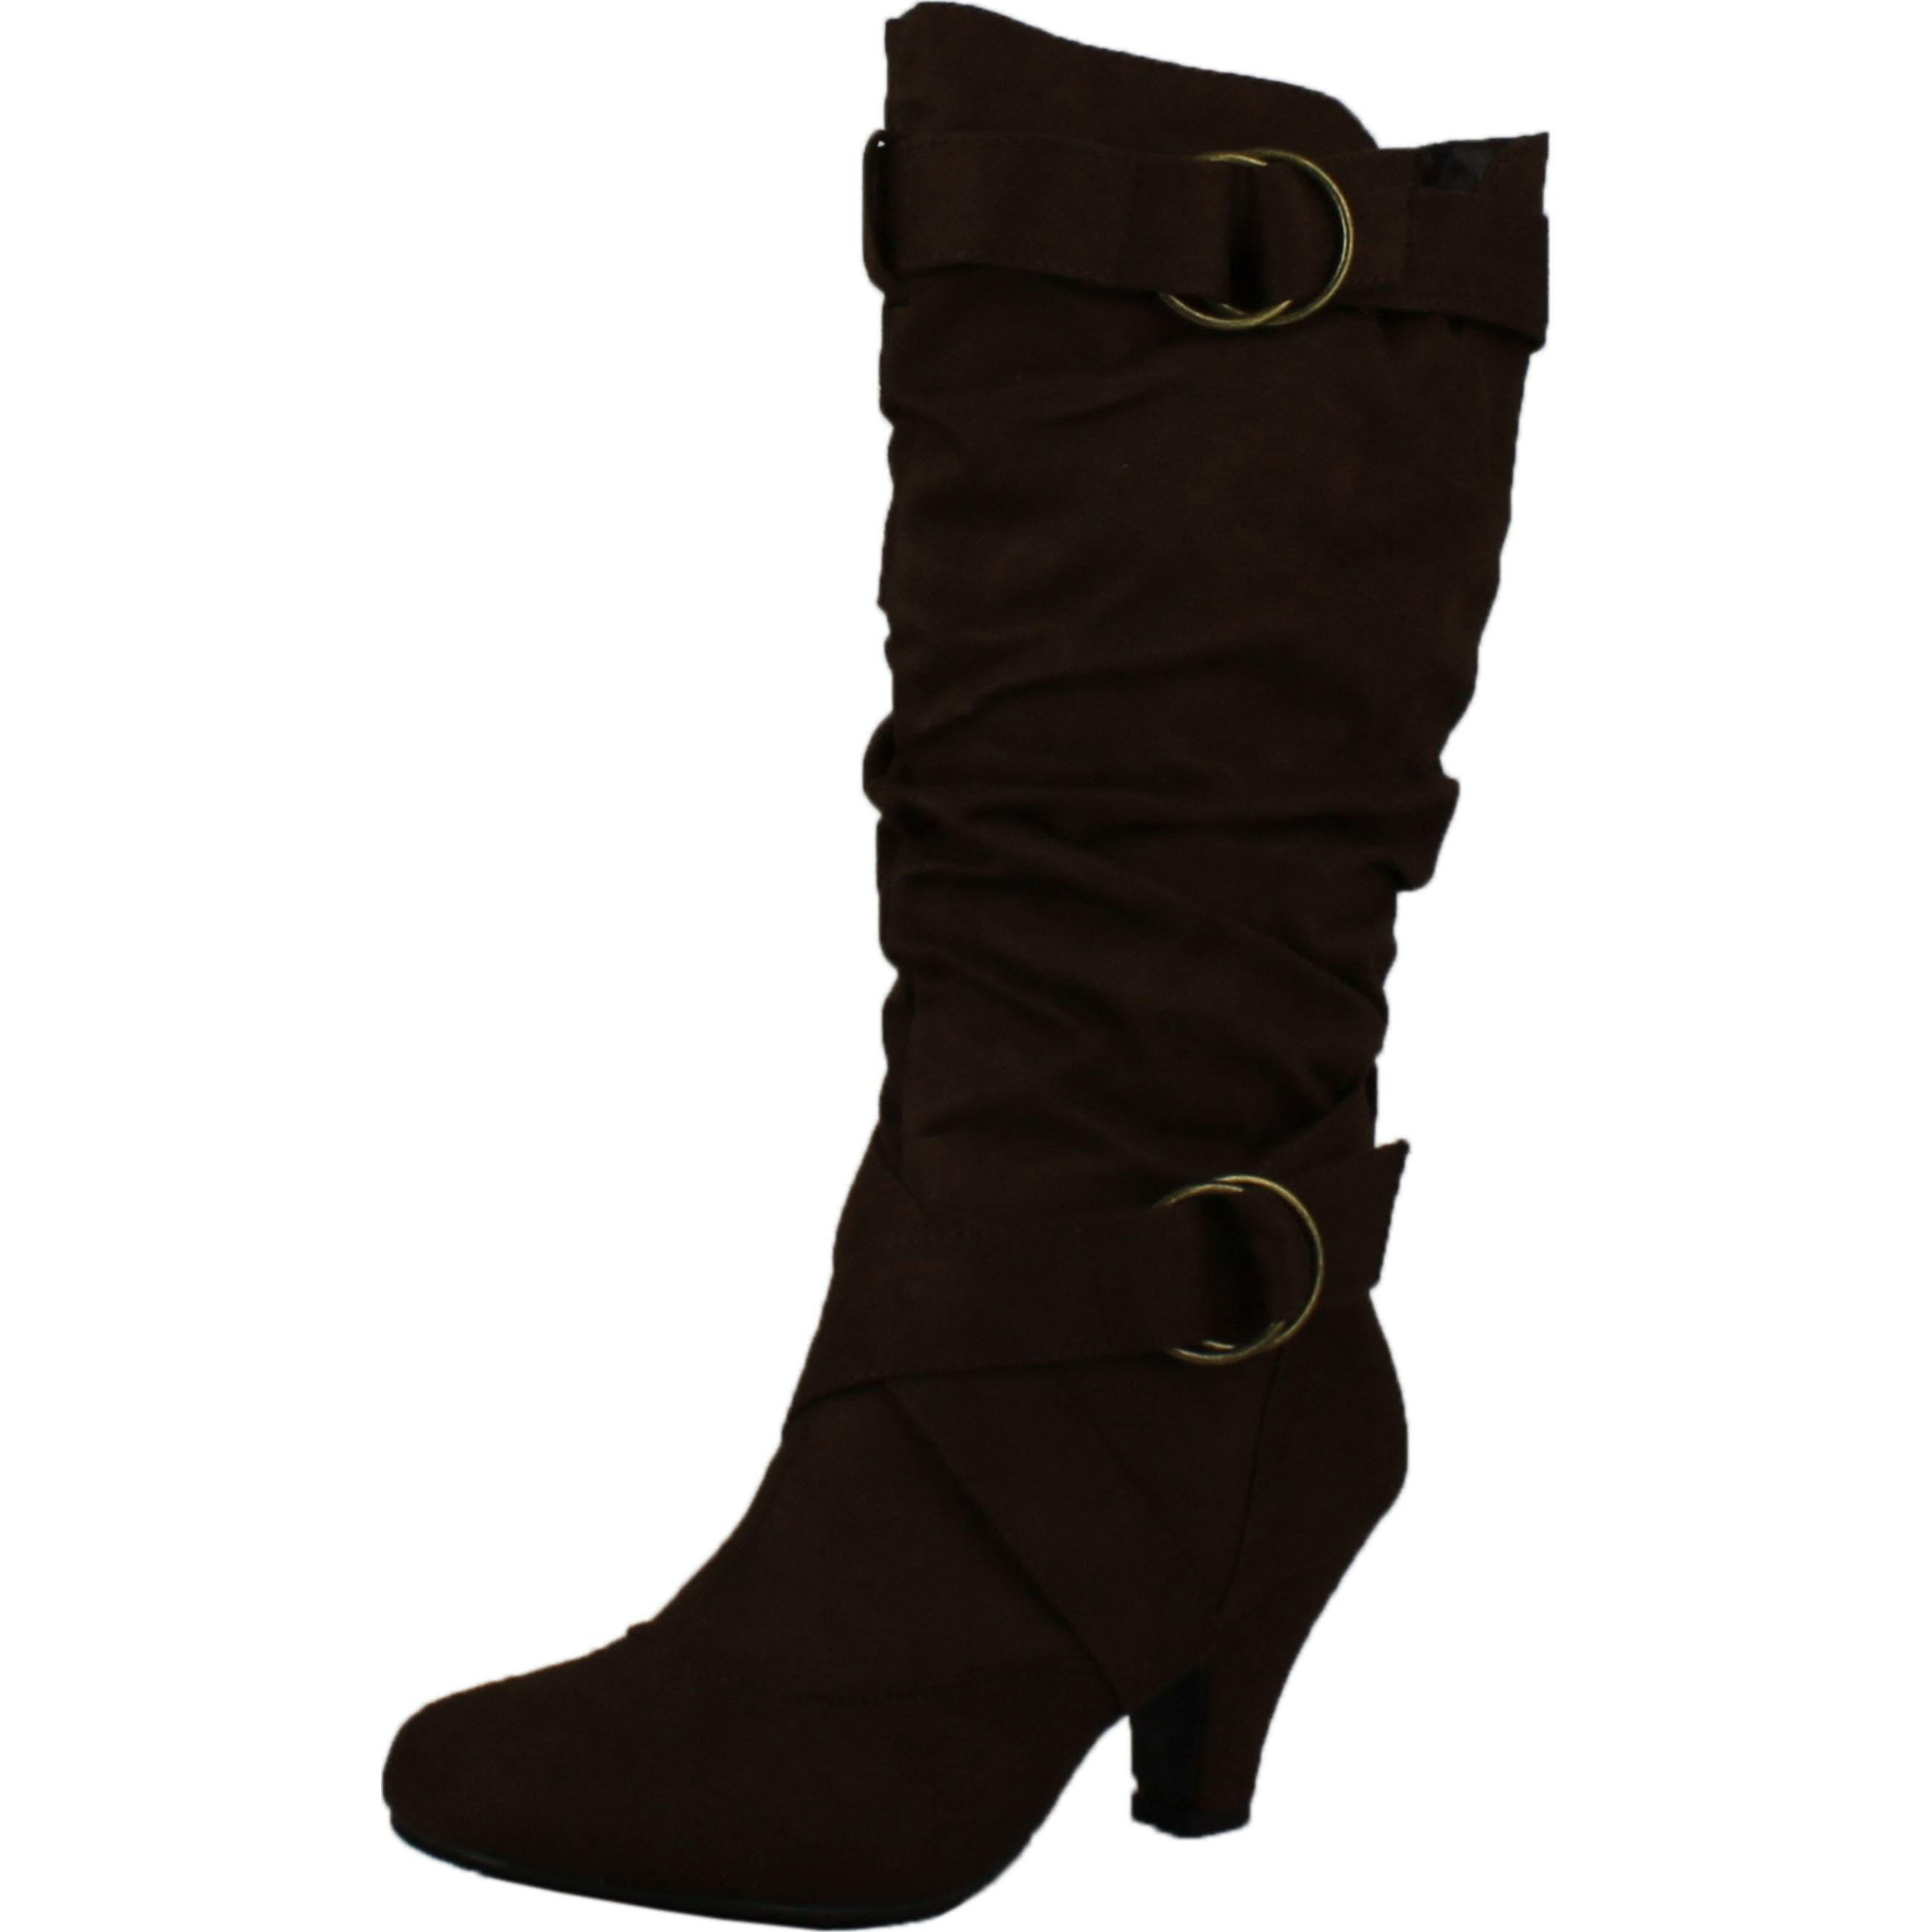 Maggie-38 Women Knee High Kitty Heels Wide Shaft Boots - image 1 of 4